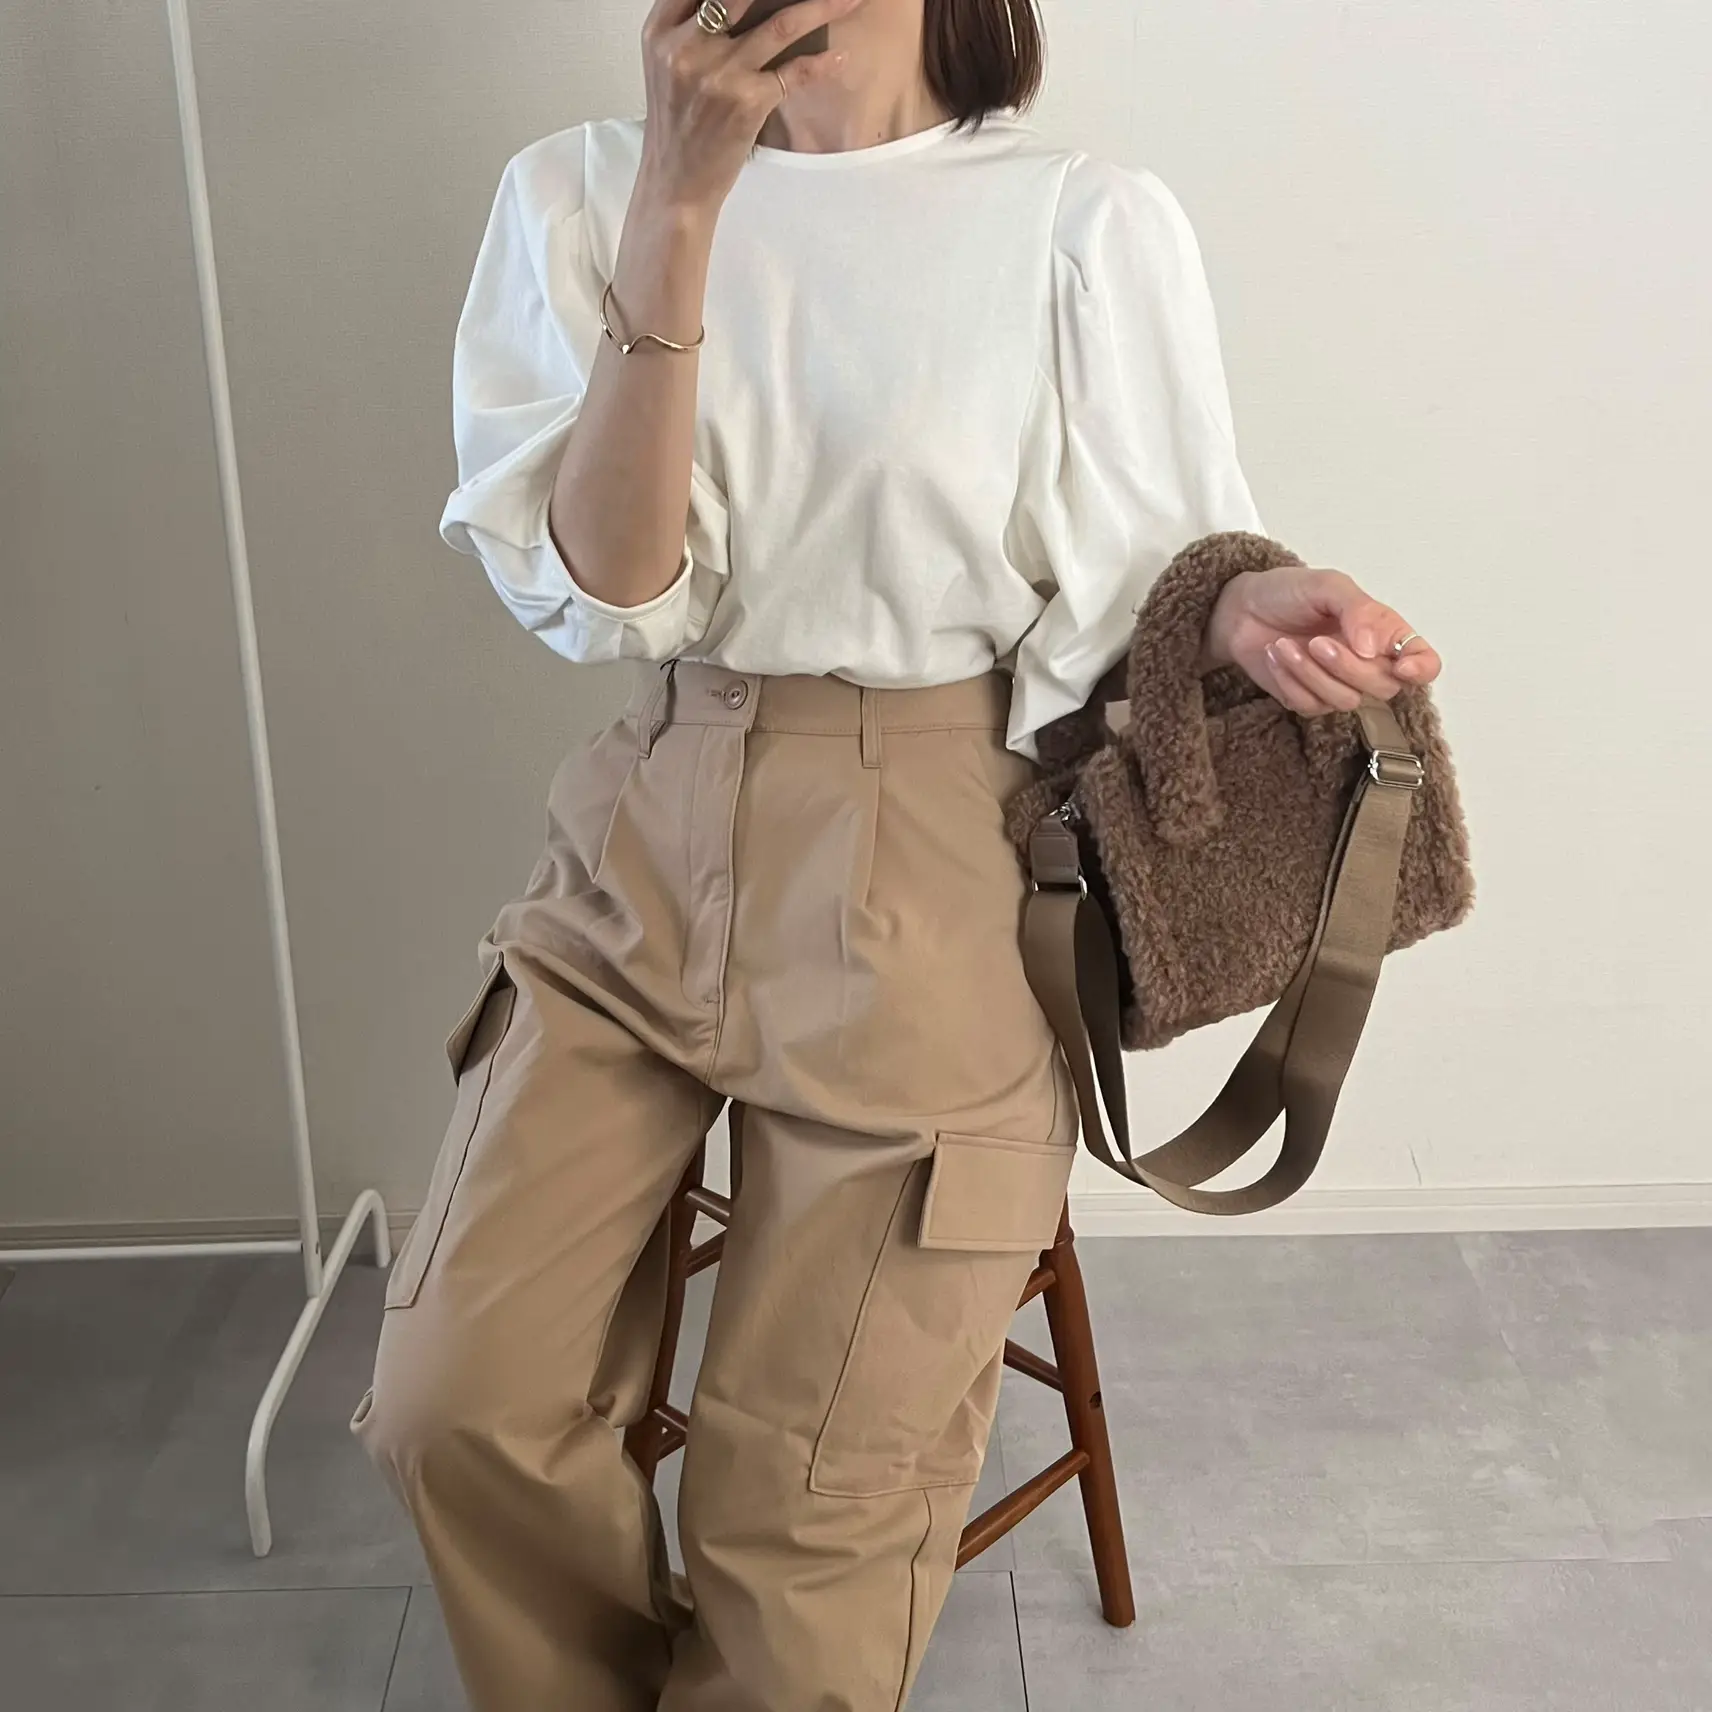 Beige Cargo Pants Outfit for Women